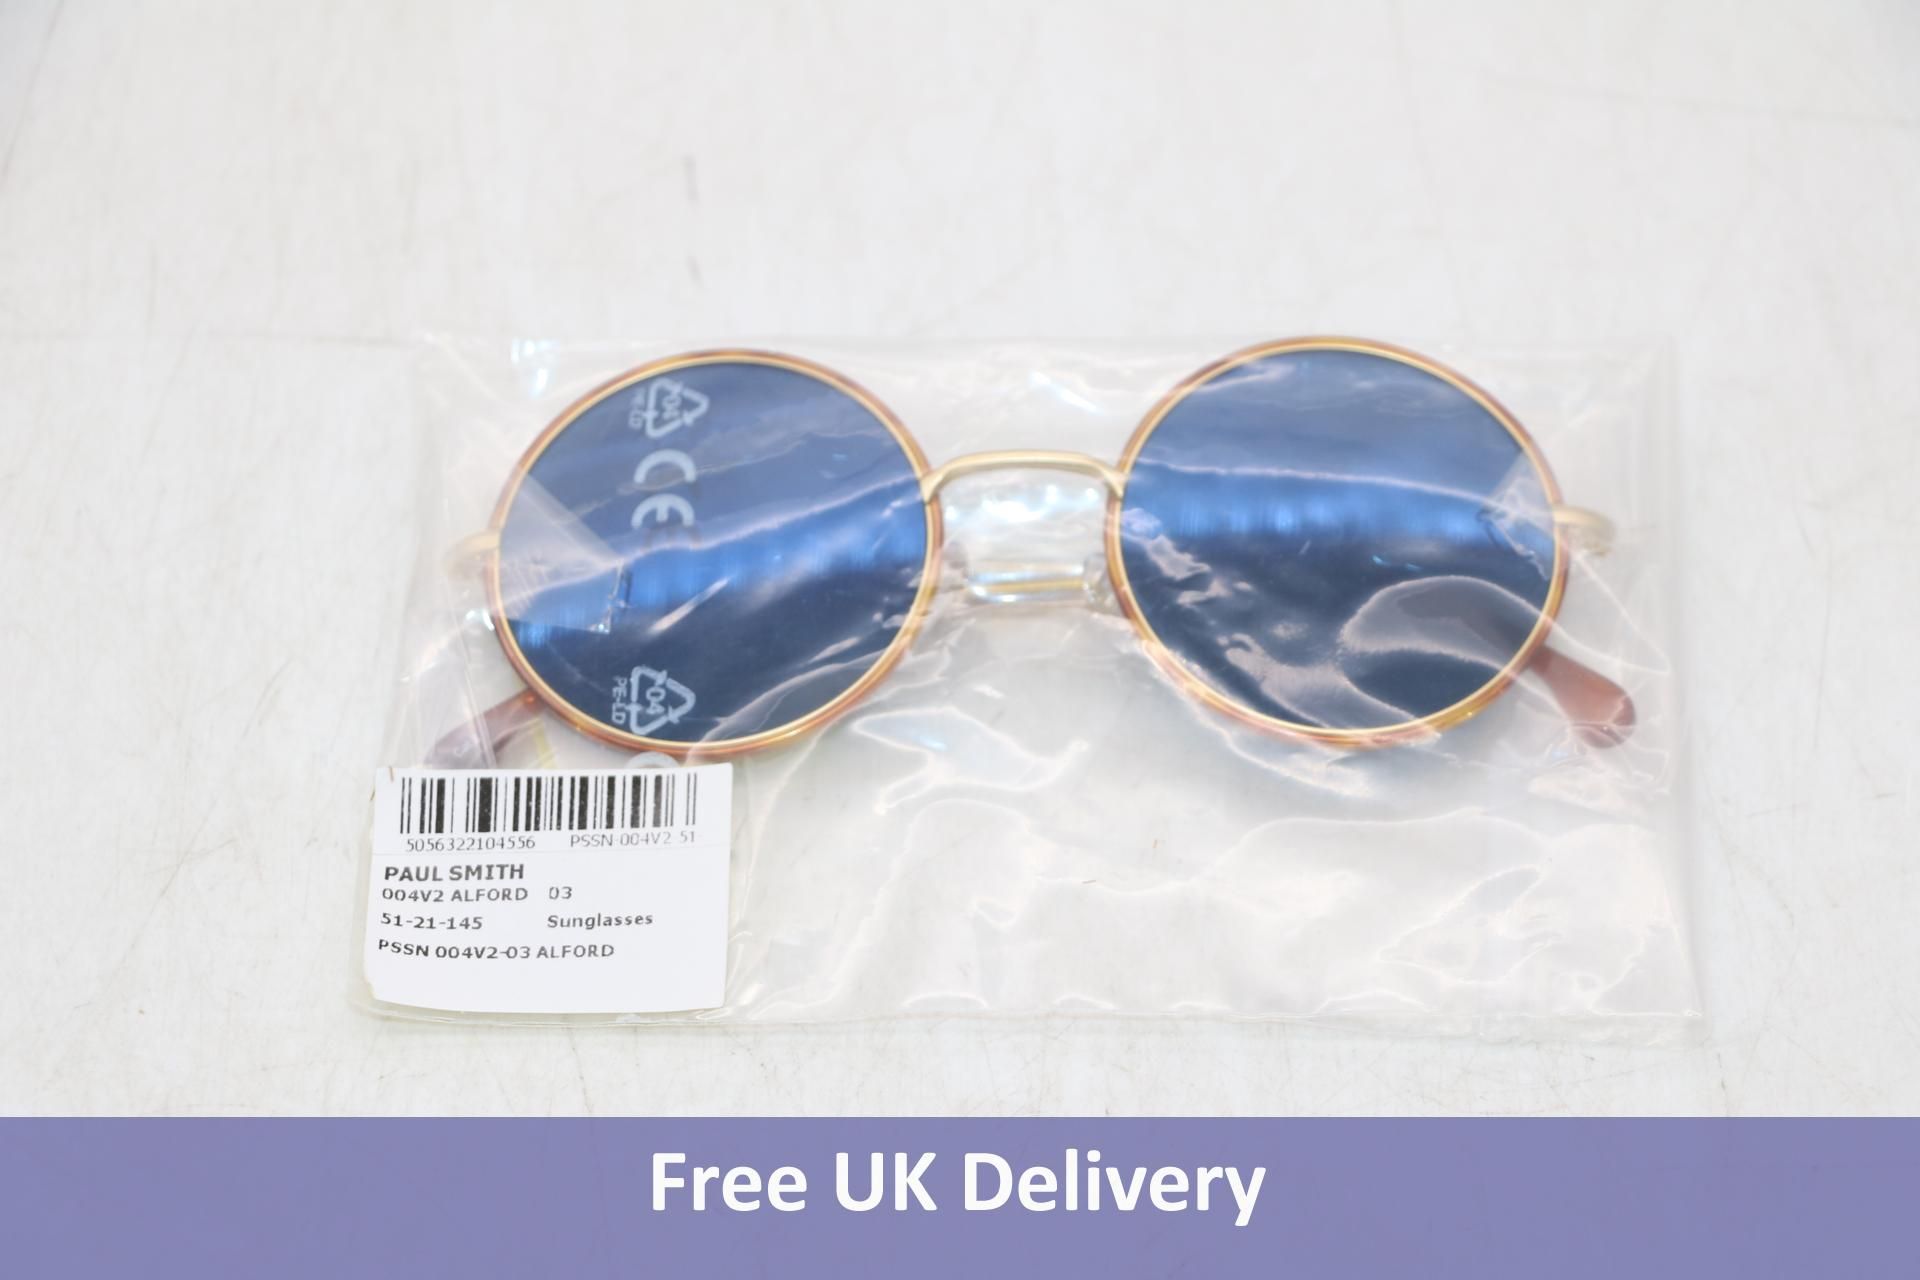 Paul Smith PS004V2 Alford 03 Round Frame Sunglasses, Gold/Brown with Blue Lens, Size 51-21-145, No C